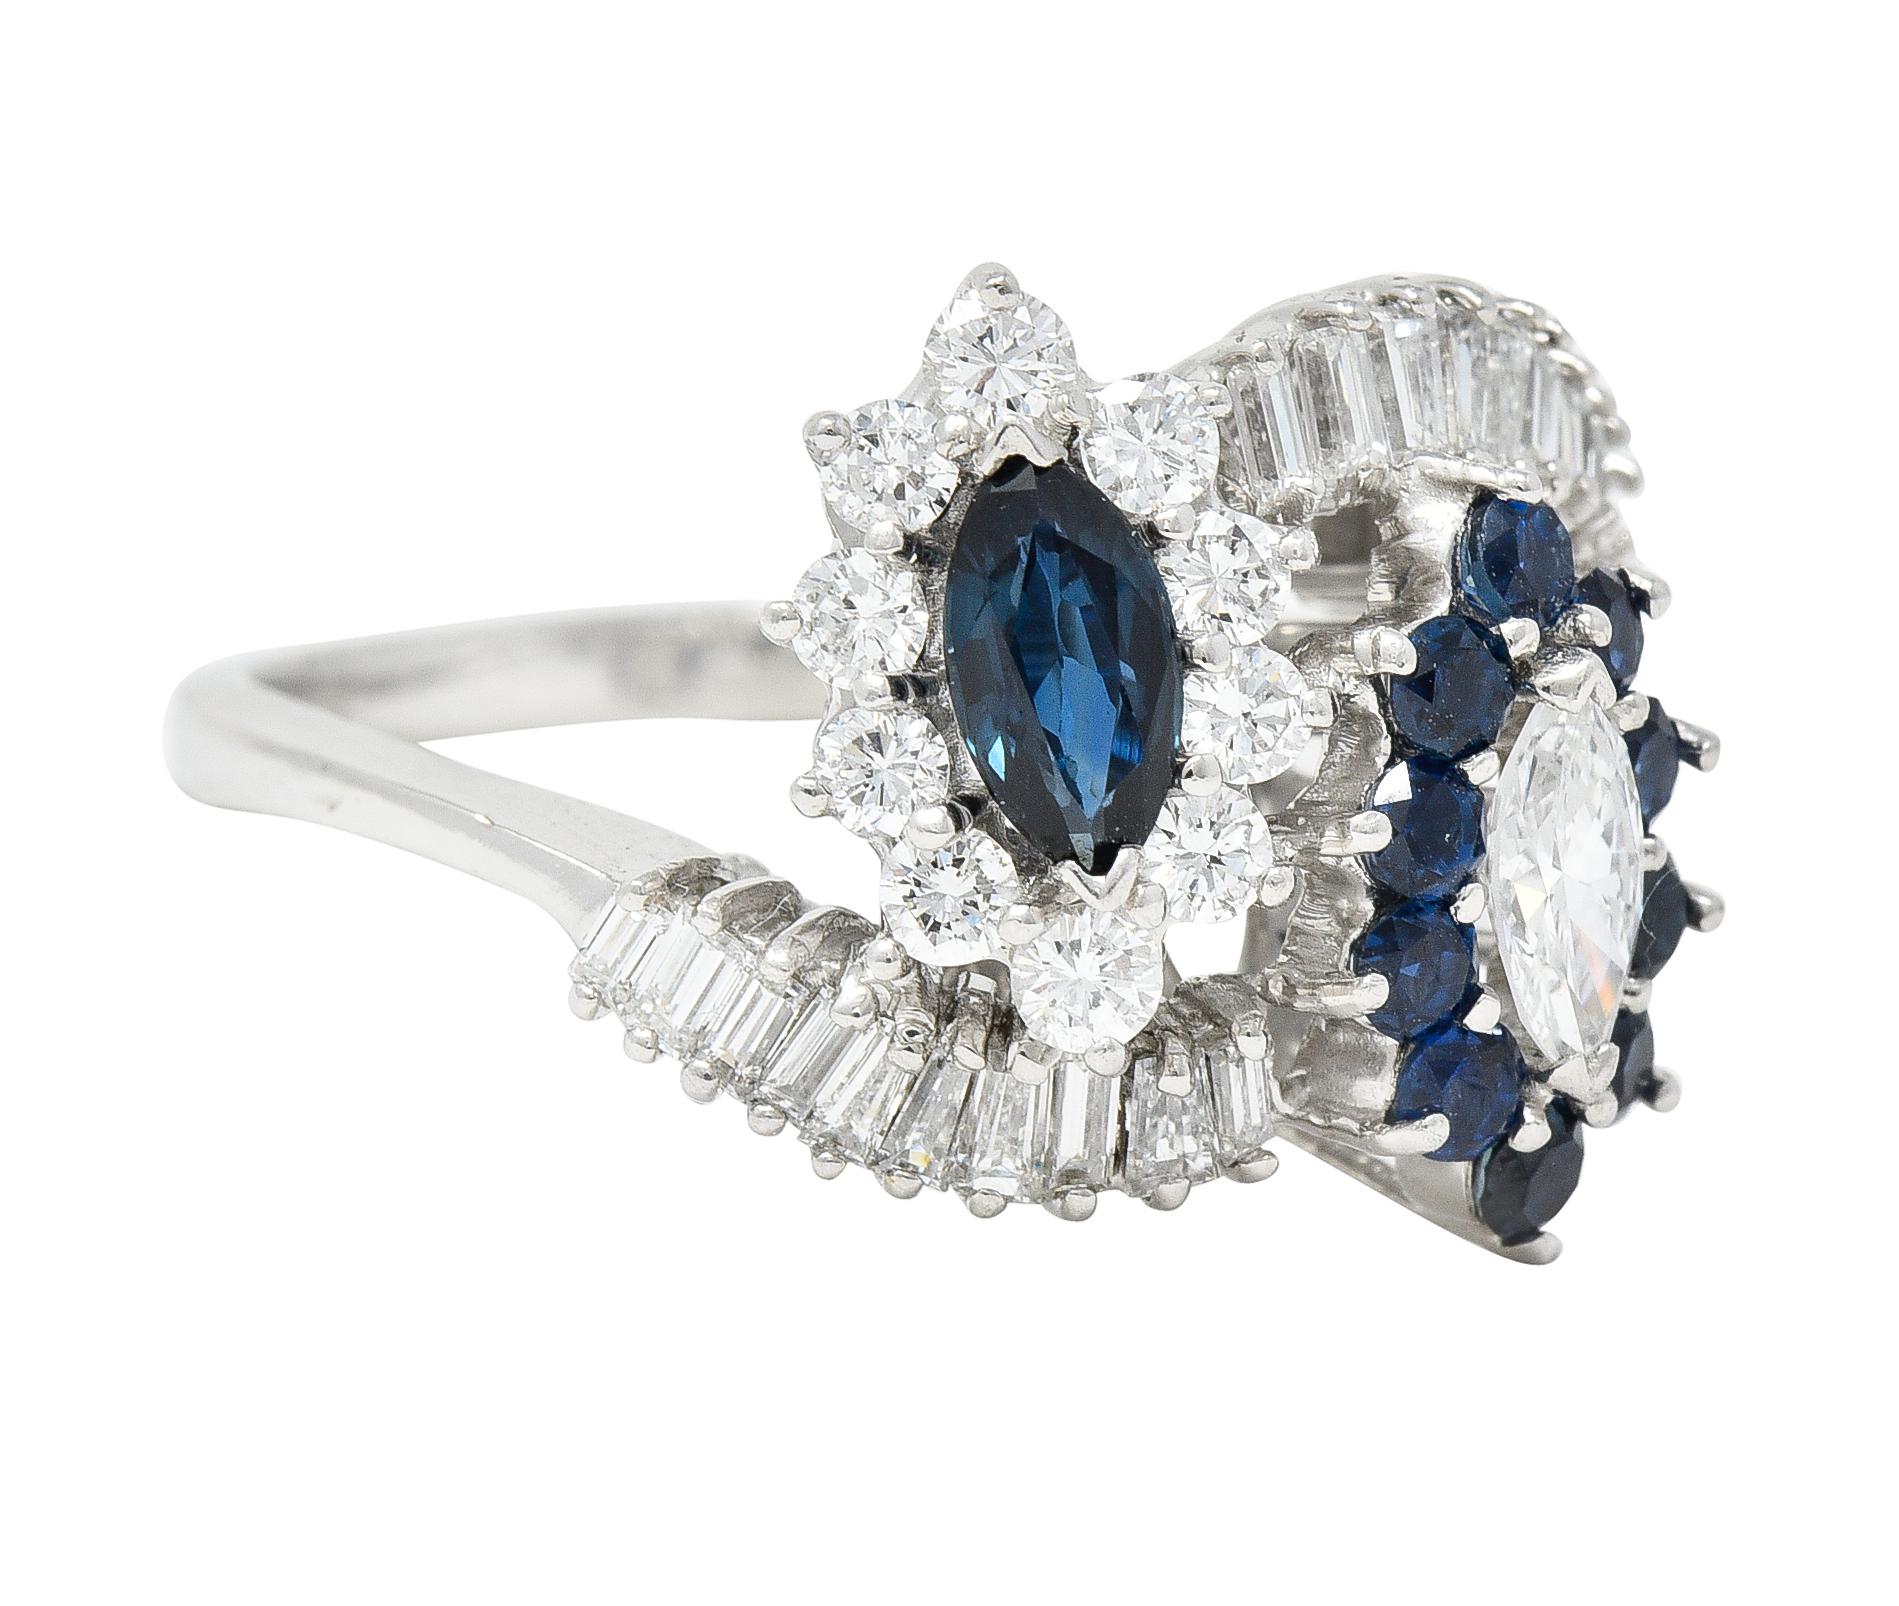 Designed as a bypass style ring terminating with prong set diamond and sapphire clusters, Once centering a sapphire and the other a diamond; both marquise cut. Sapphire weighs approximately 0.38 carat - transparent medium greenish-blue. Diamond